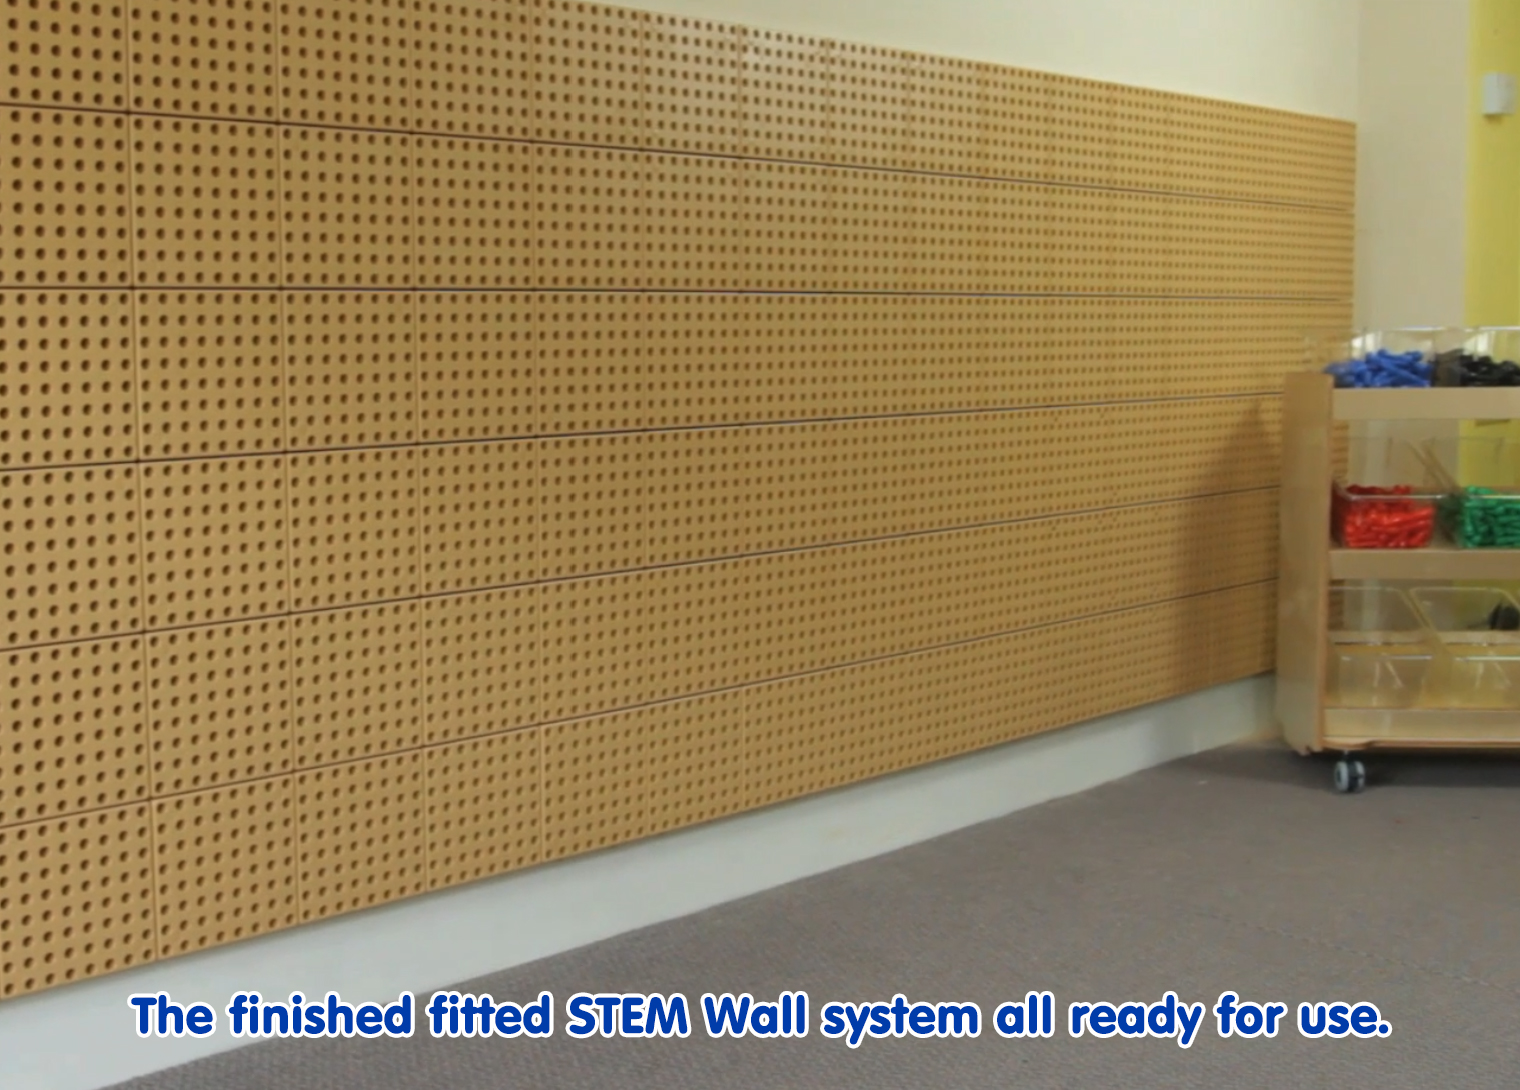 Fitting an Indoor STEM Wall WITHOUT Back Panels